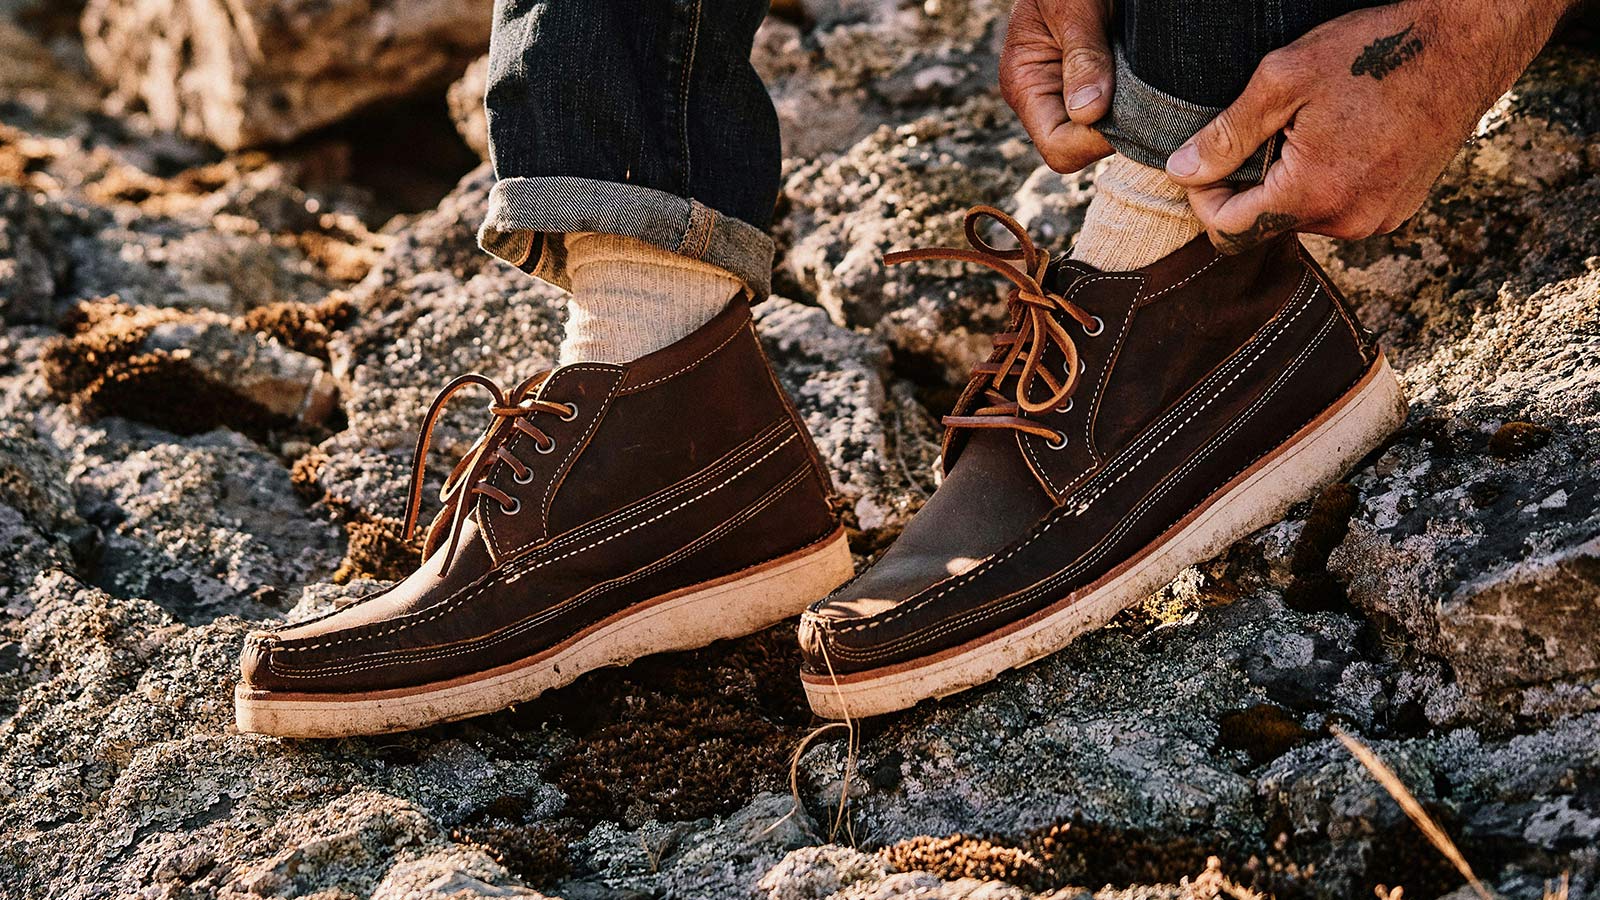 Huckberry x Easymoc Scout Boot